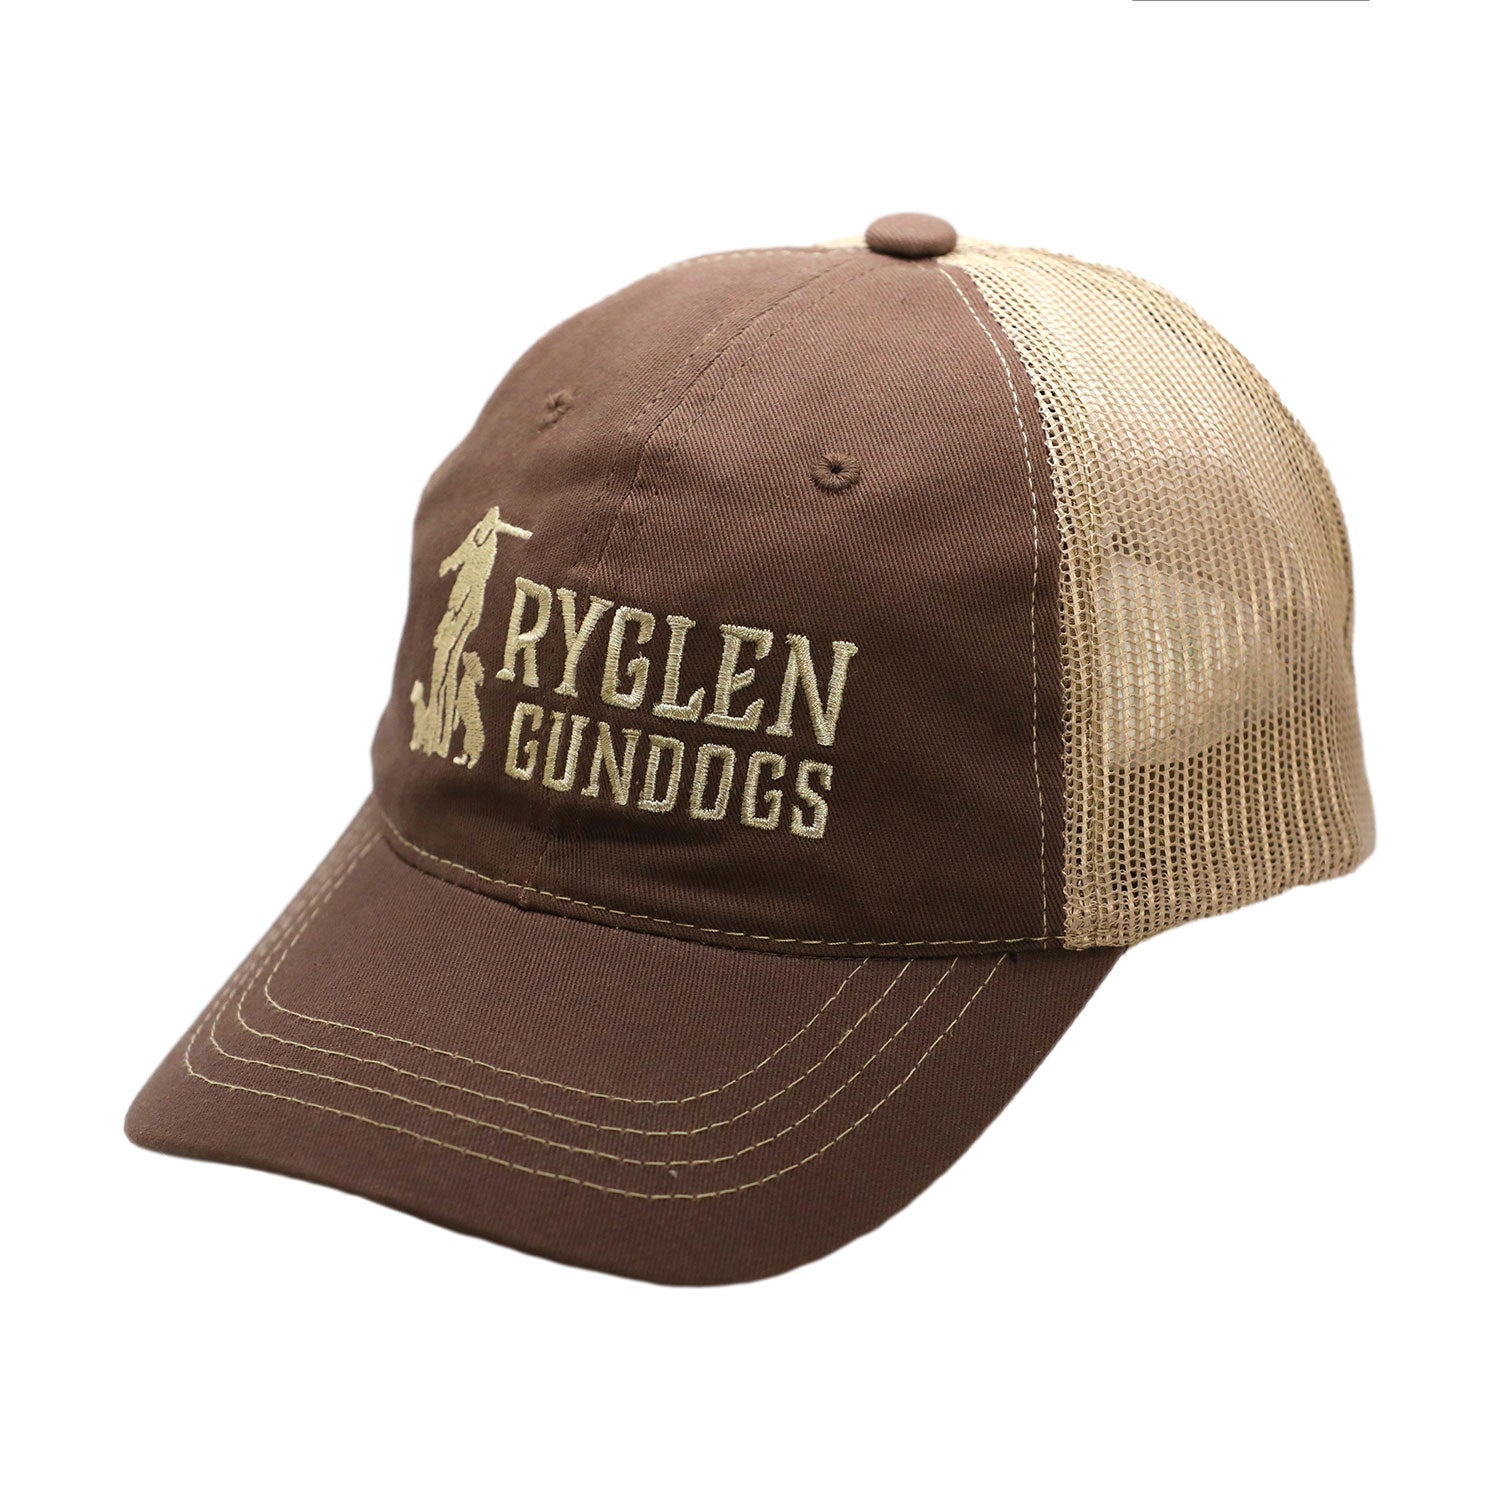 Ryglen Hat - Brown and Tan low profile